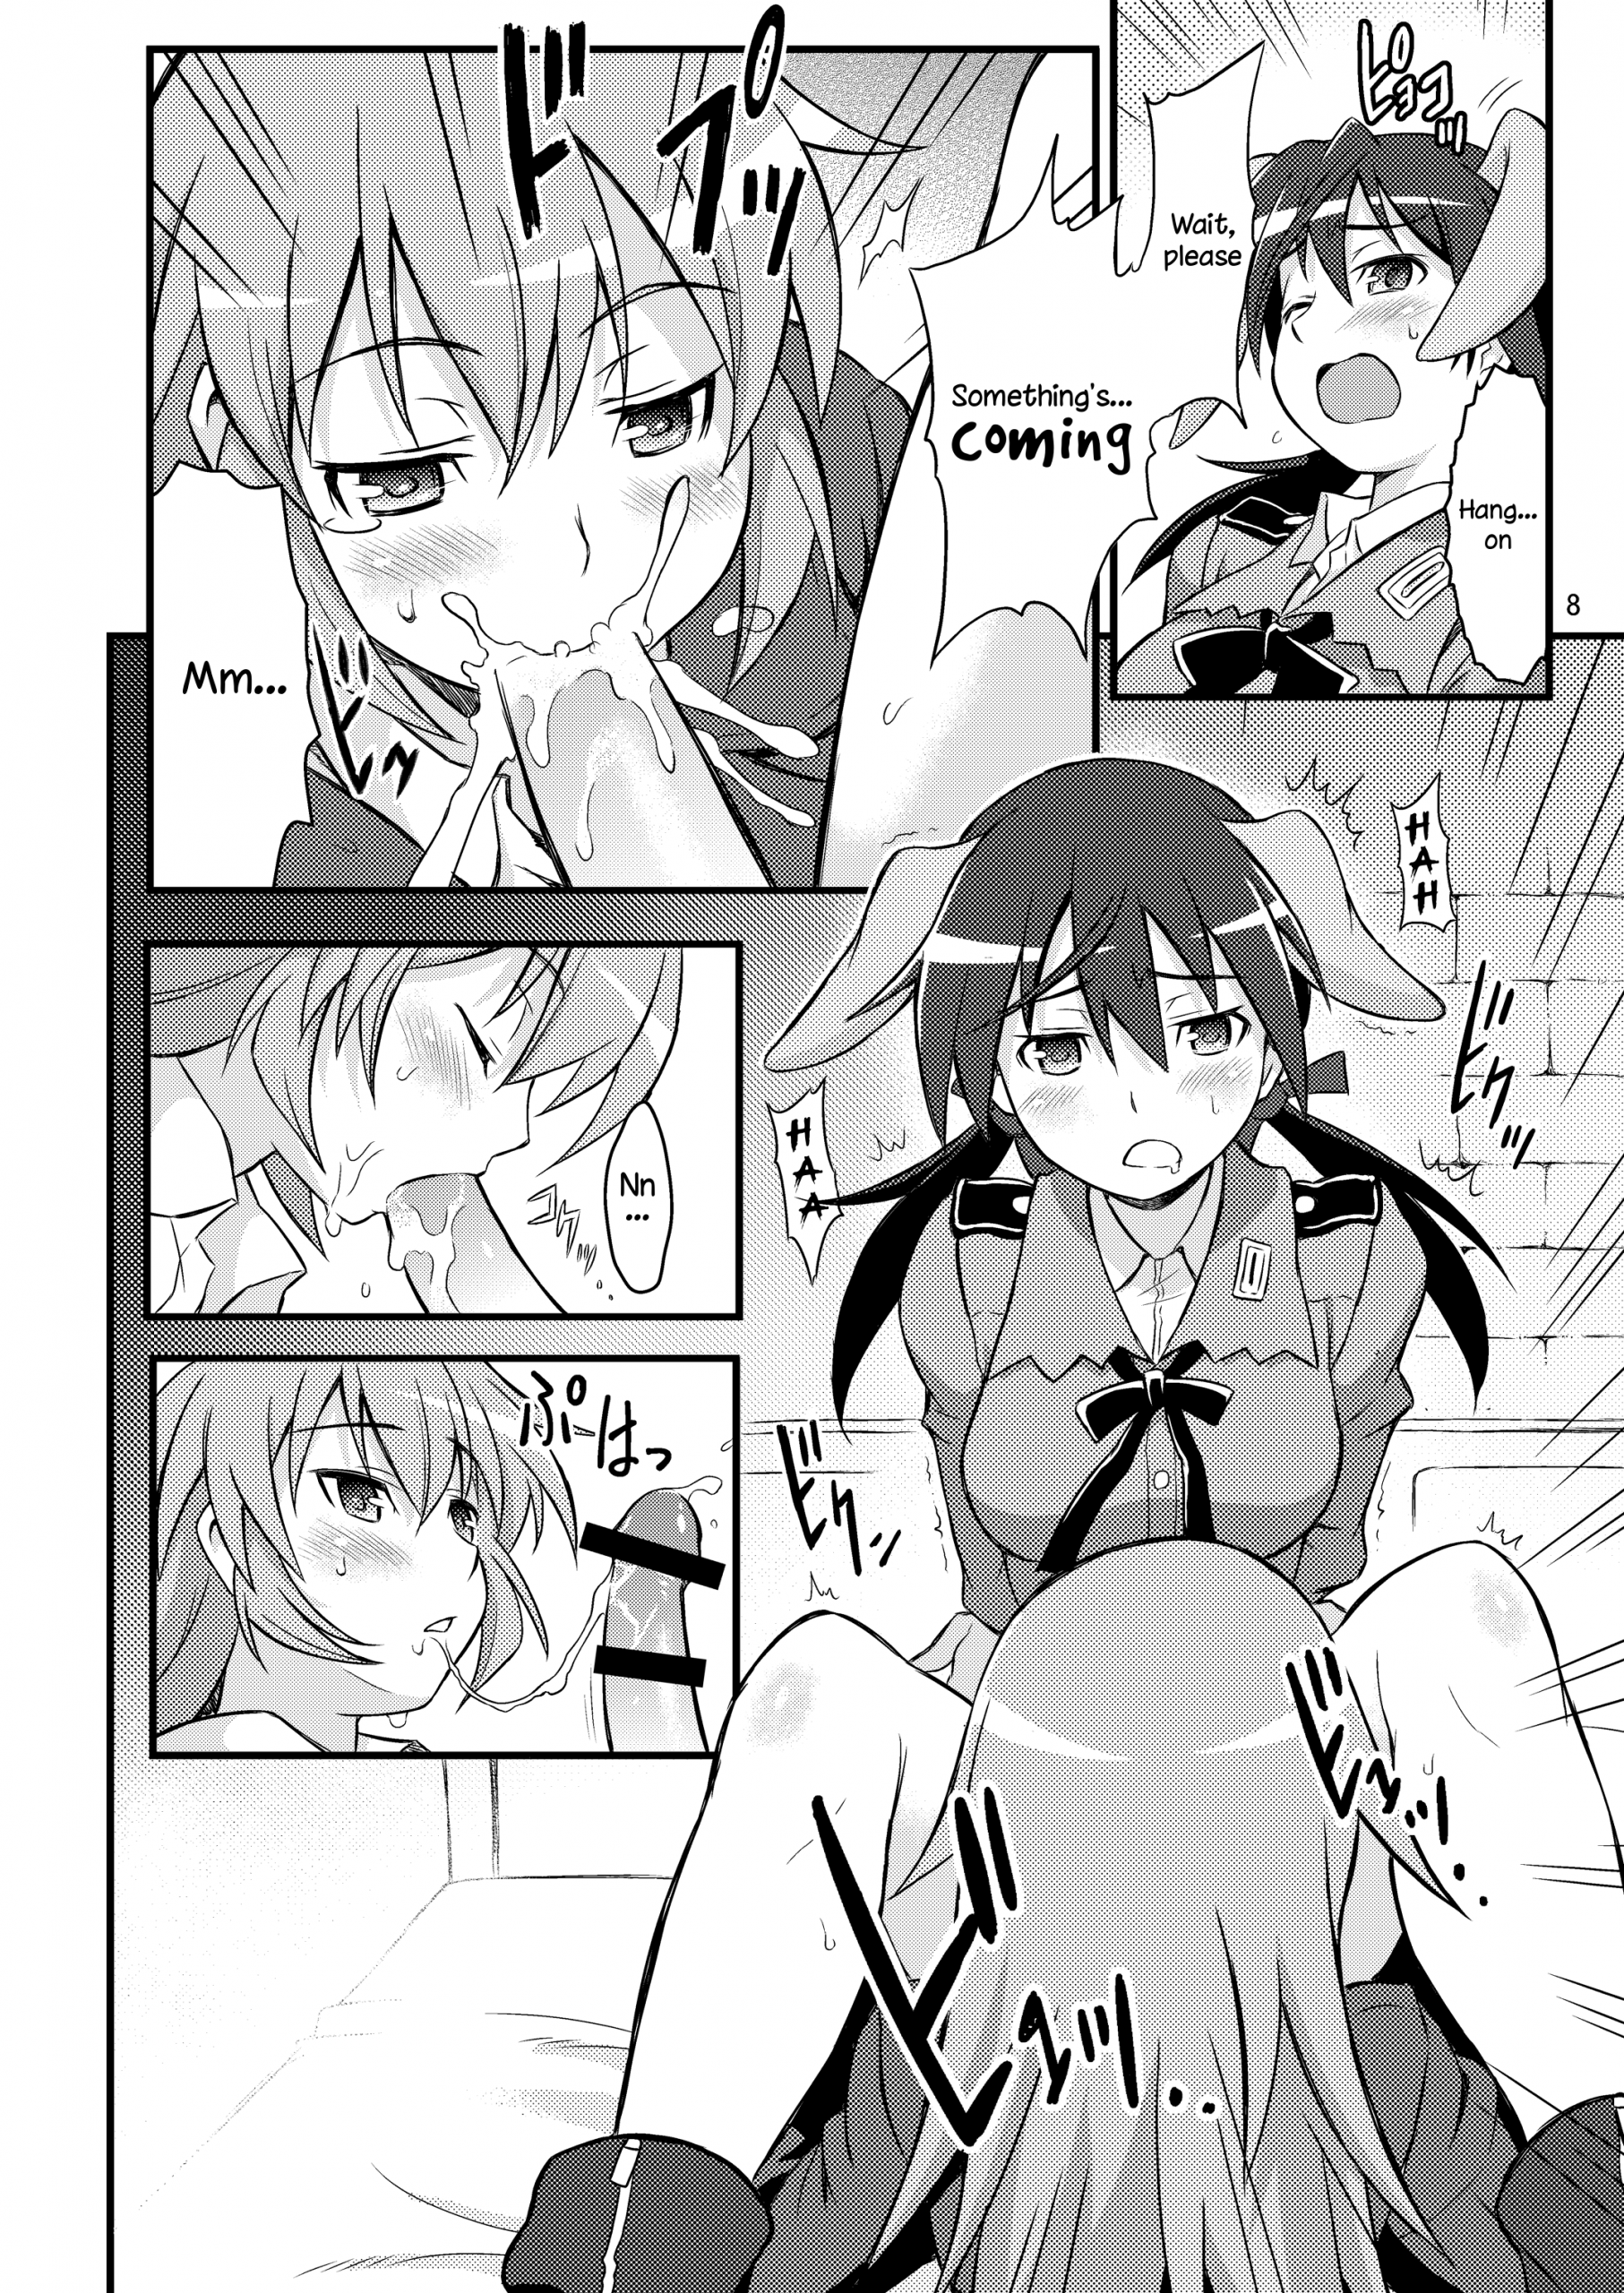 Shir and Gert in Big Trouble hentai manga picture 7